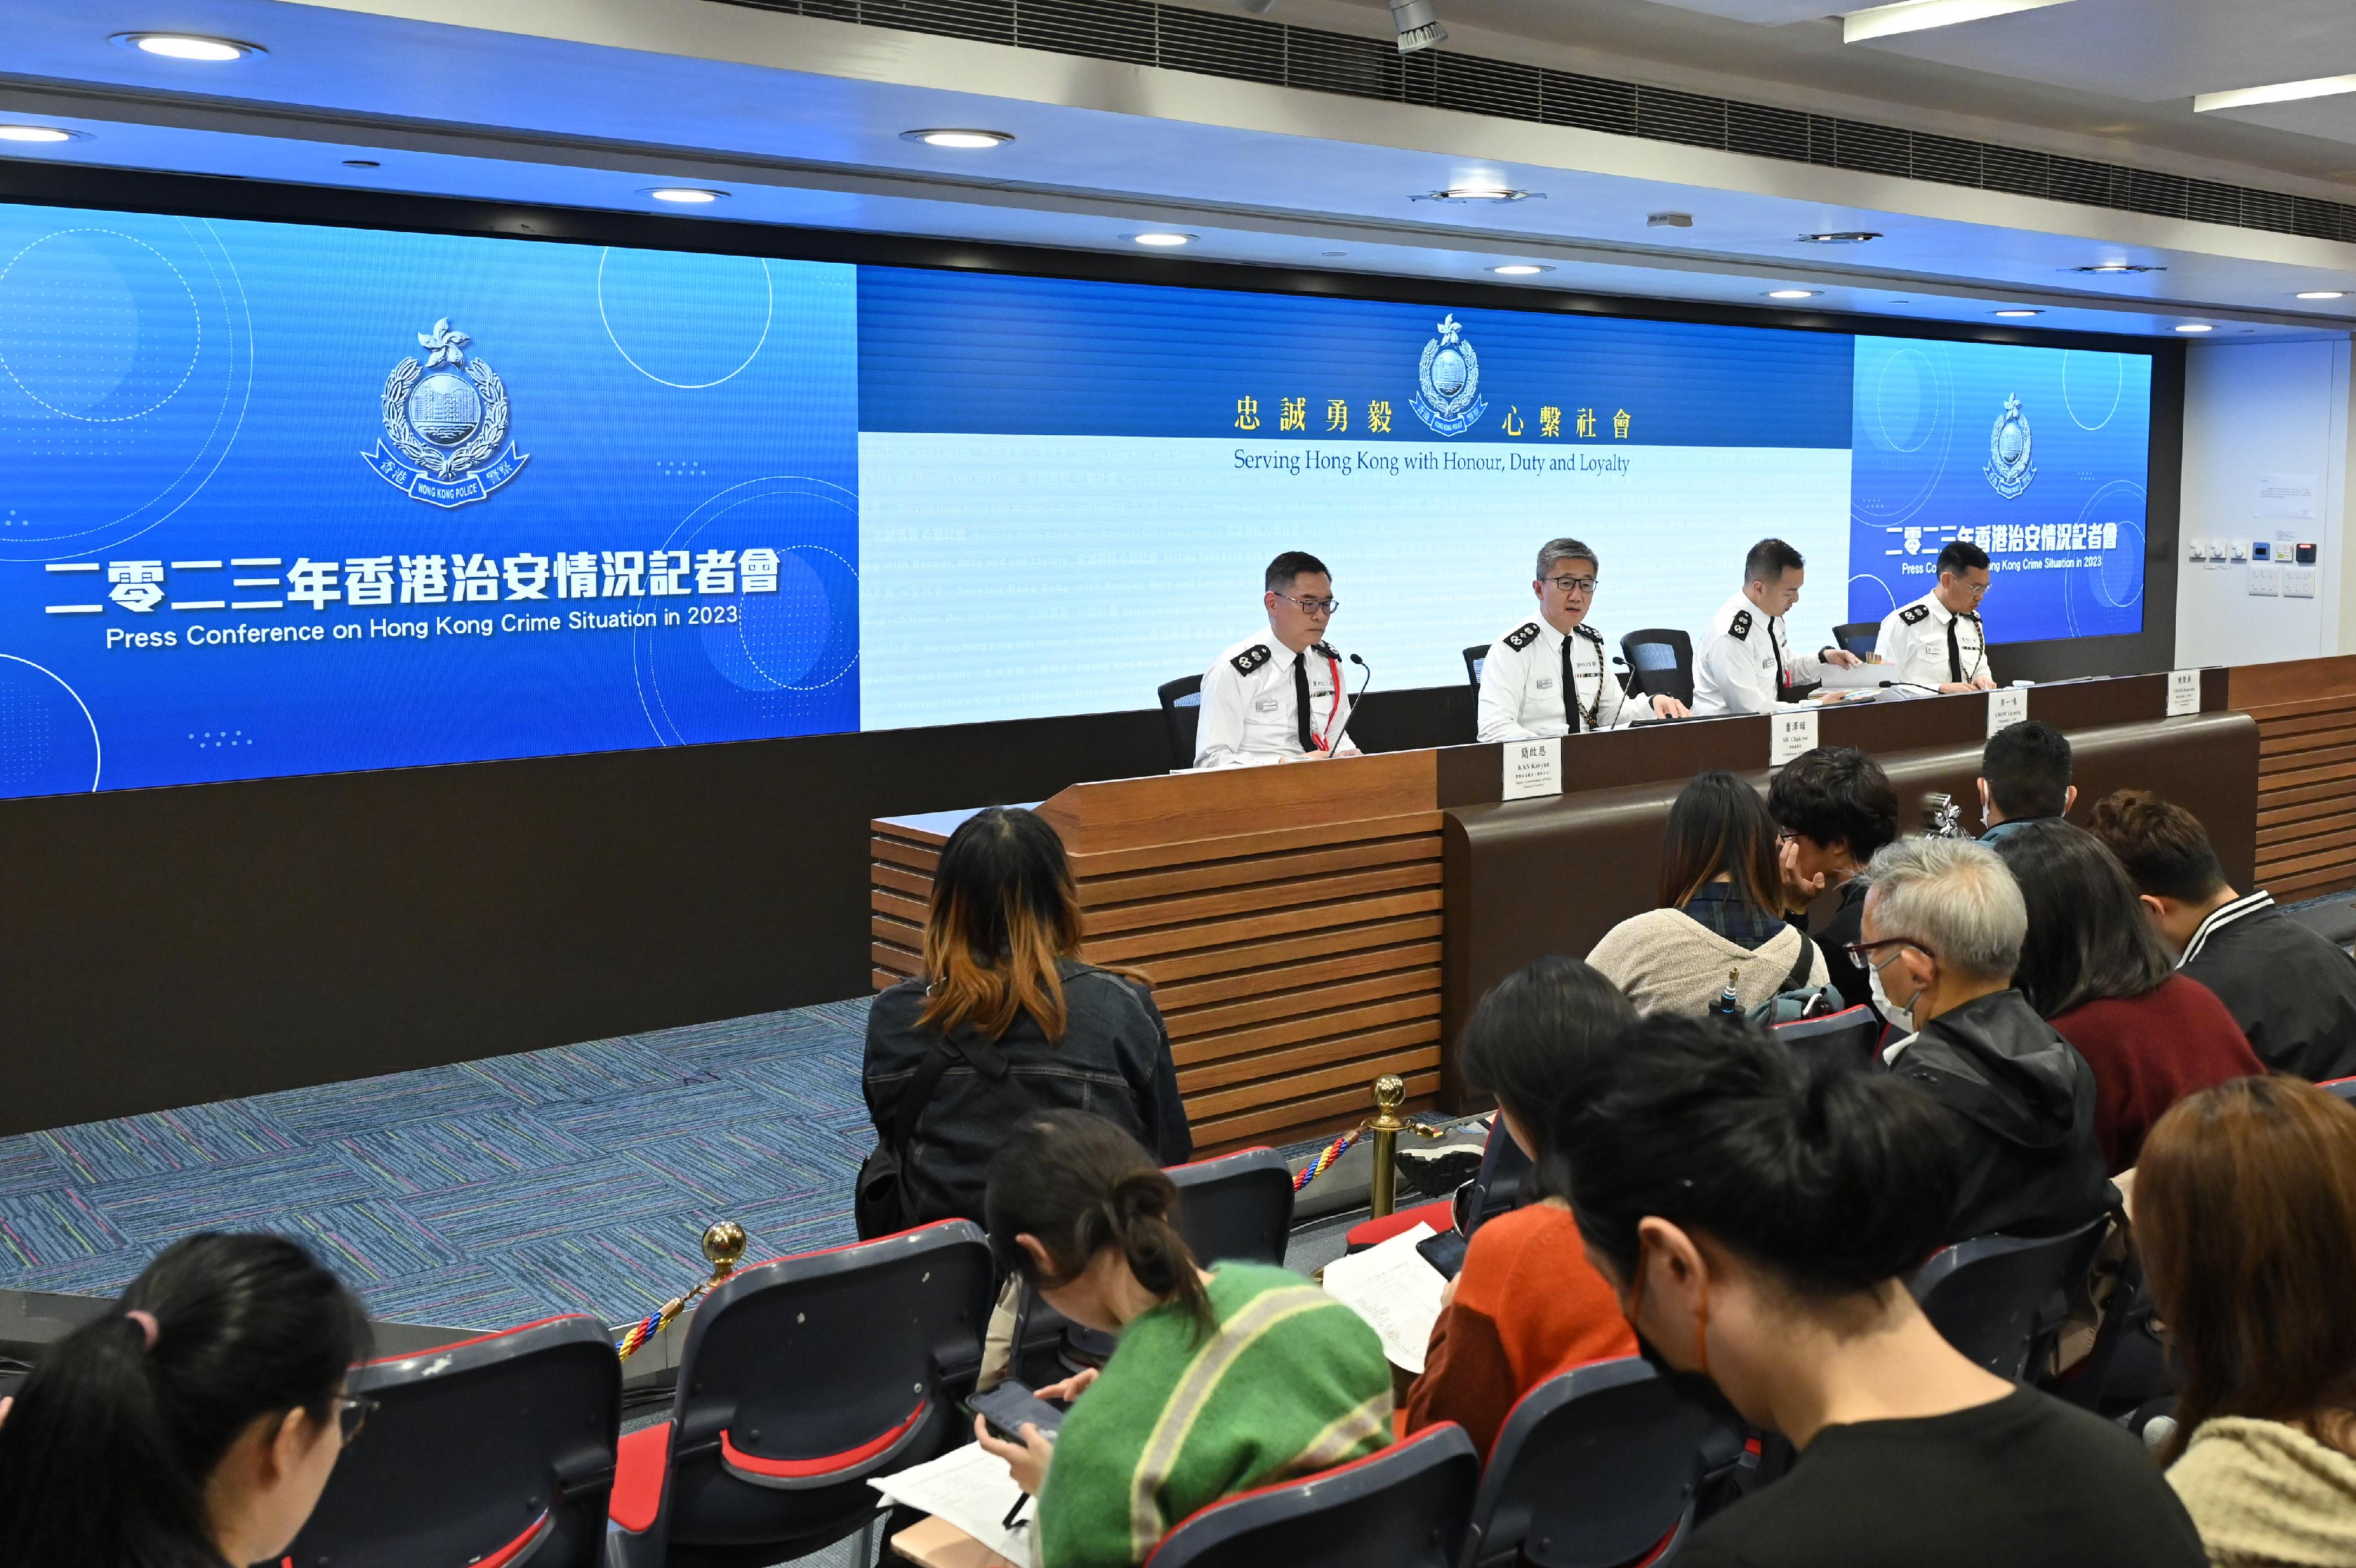 The Hong Kong Police Force held a press conference today (February 6) to review the law and order situation of Hong Kong and the work of the Police in 2023.